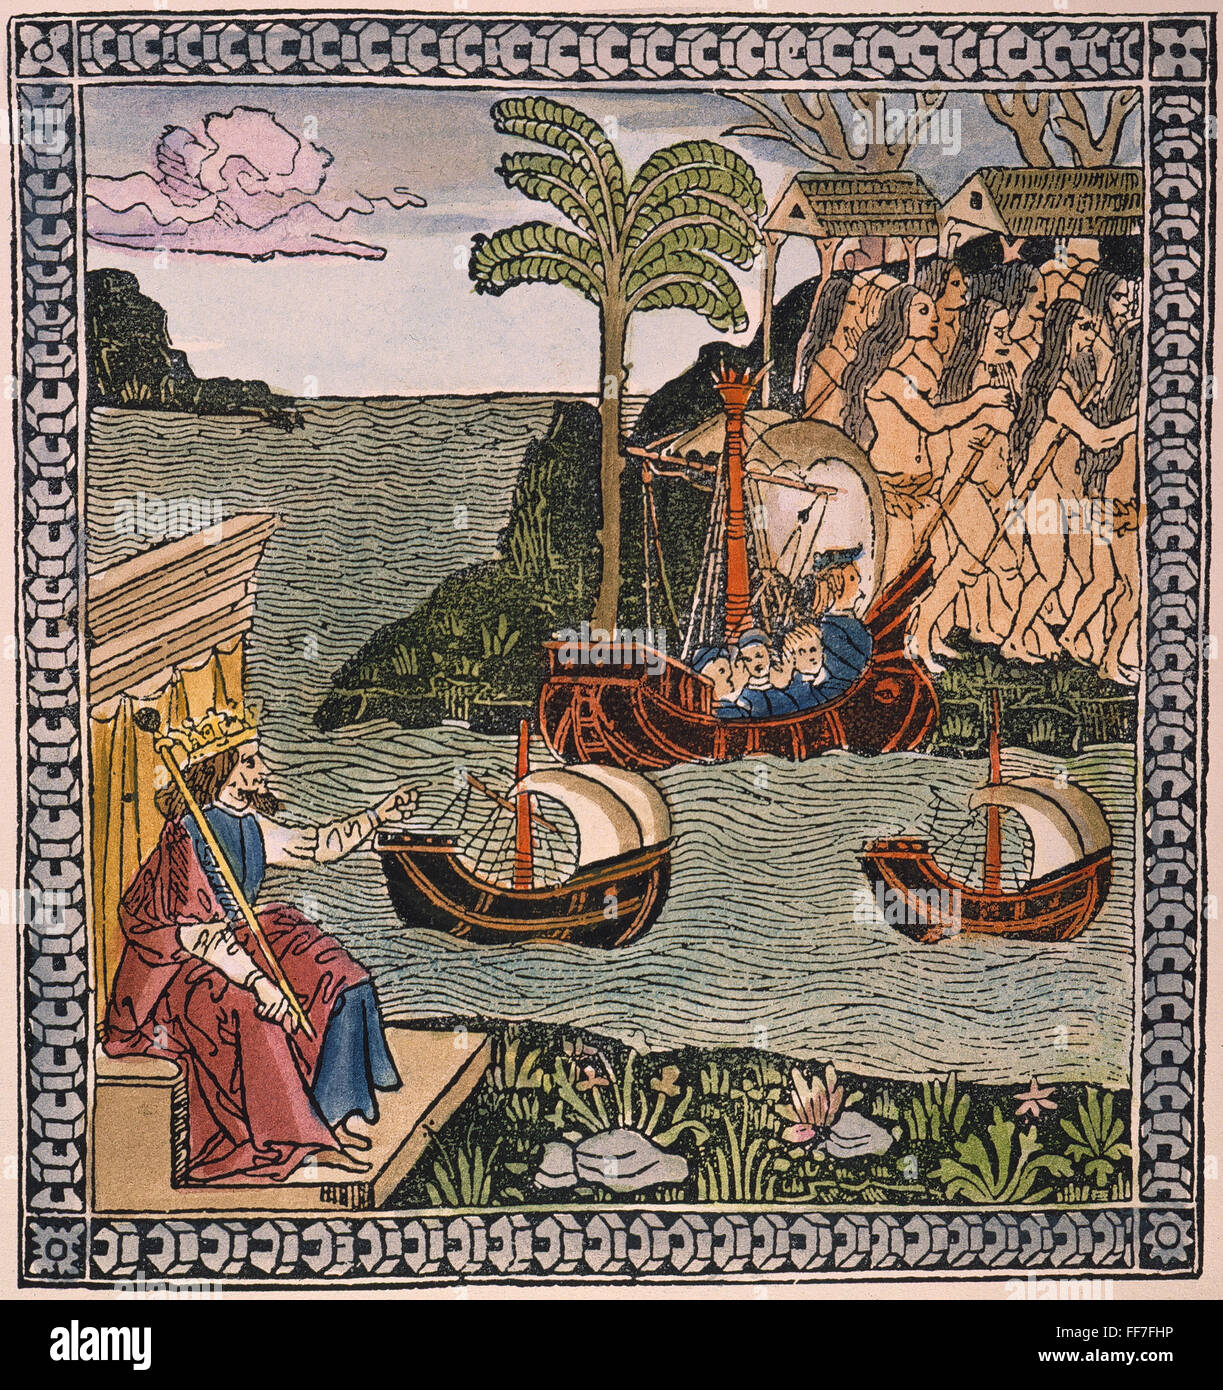 COLUMBUS: NEW WORLD, 1492. /nThe earliest depiction of Columbus landing in the New World: colored woodcut from Giuliano Dati's Narrative of Columbus, Florence, 1493. Stock Photo